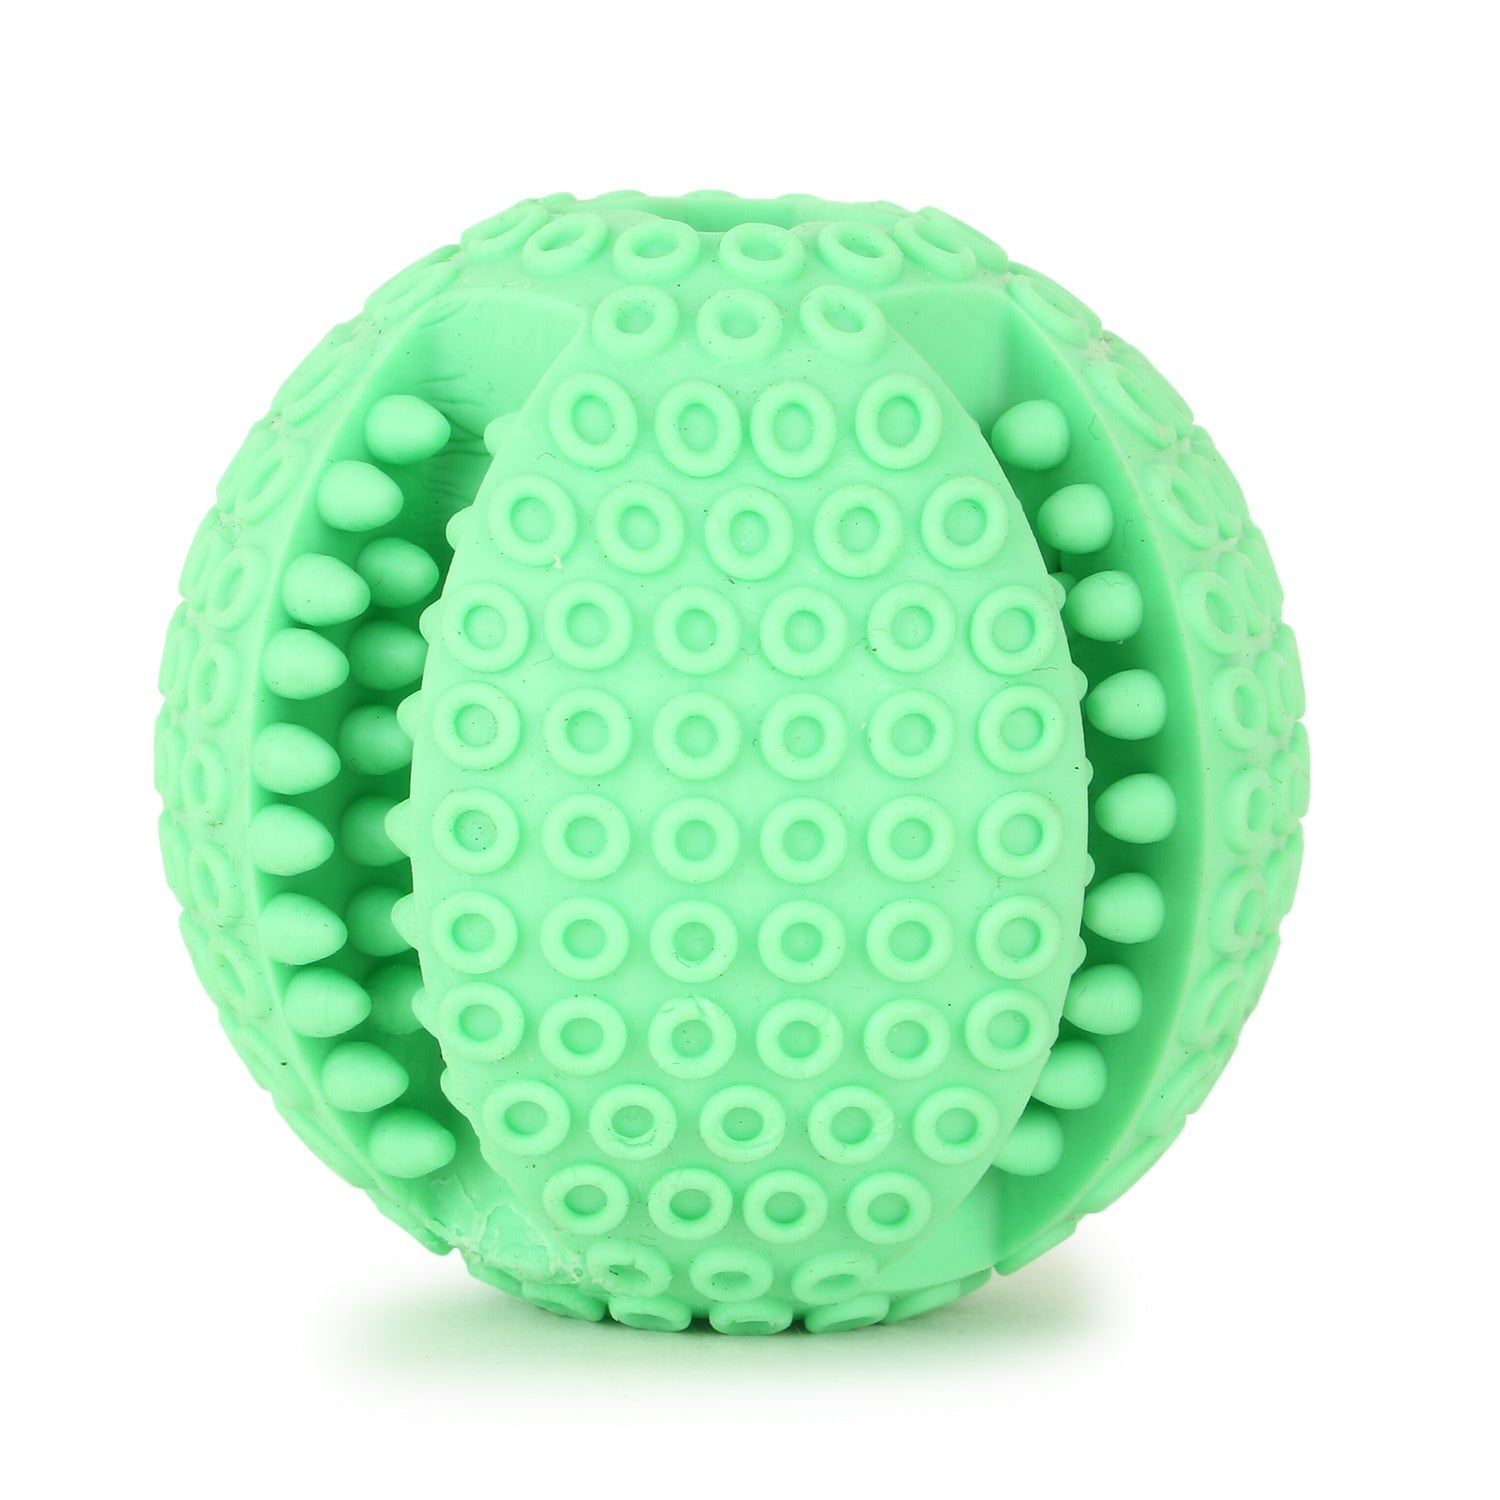 Solid Ball with Hollow Centre & Grooves in Sides for Treats